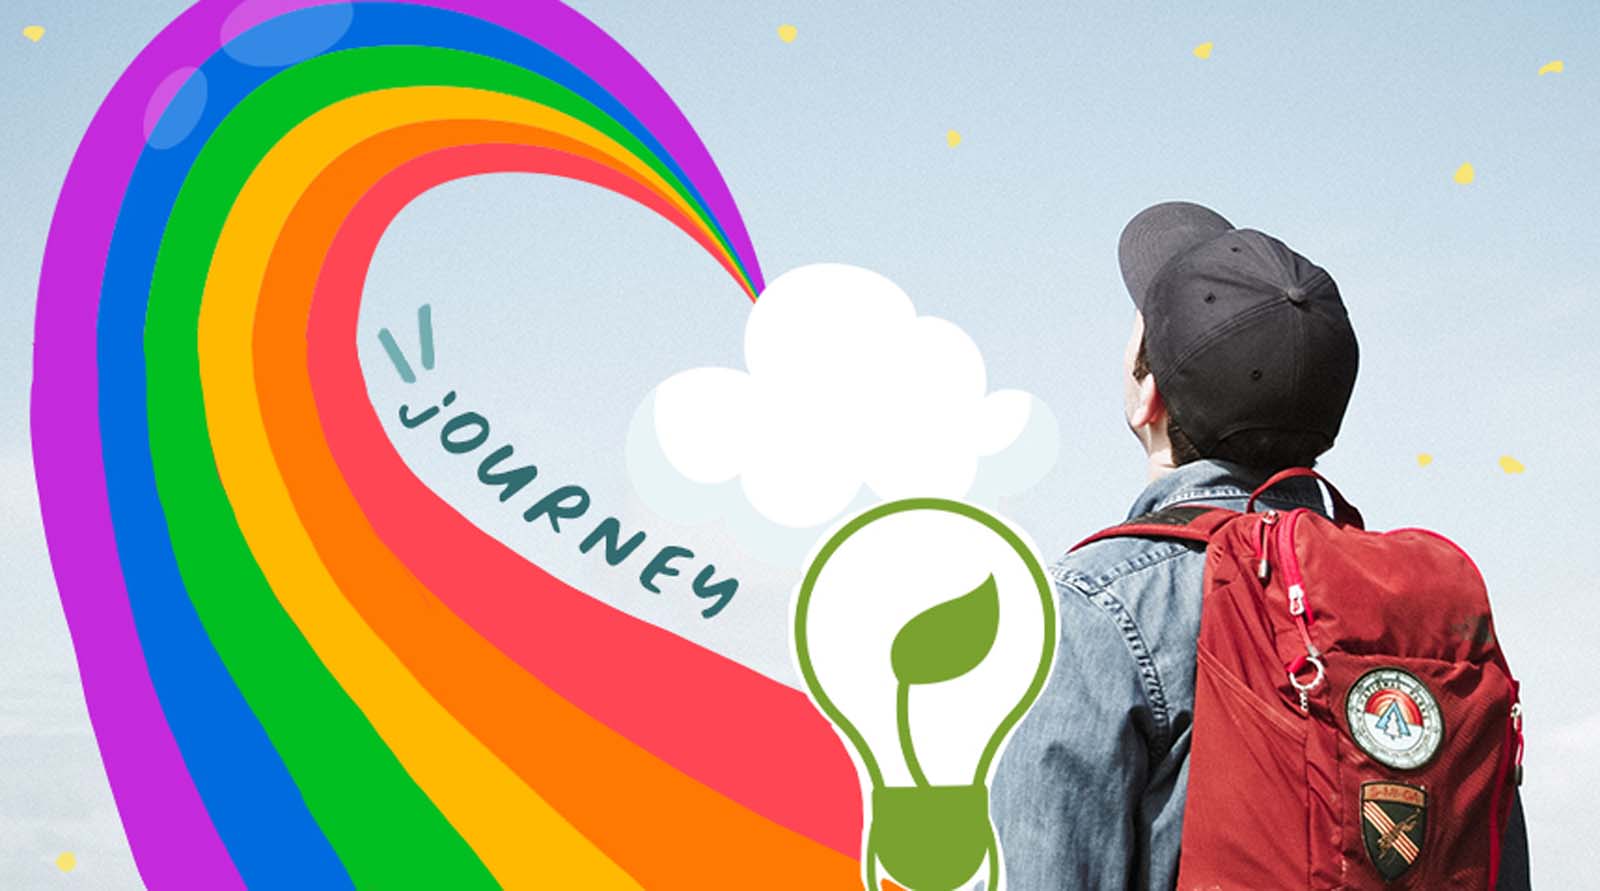 The Journey In Supporting Our LGBTQIA+ Friends #mindfulchats with Kyle #pride